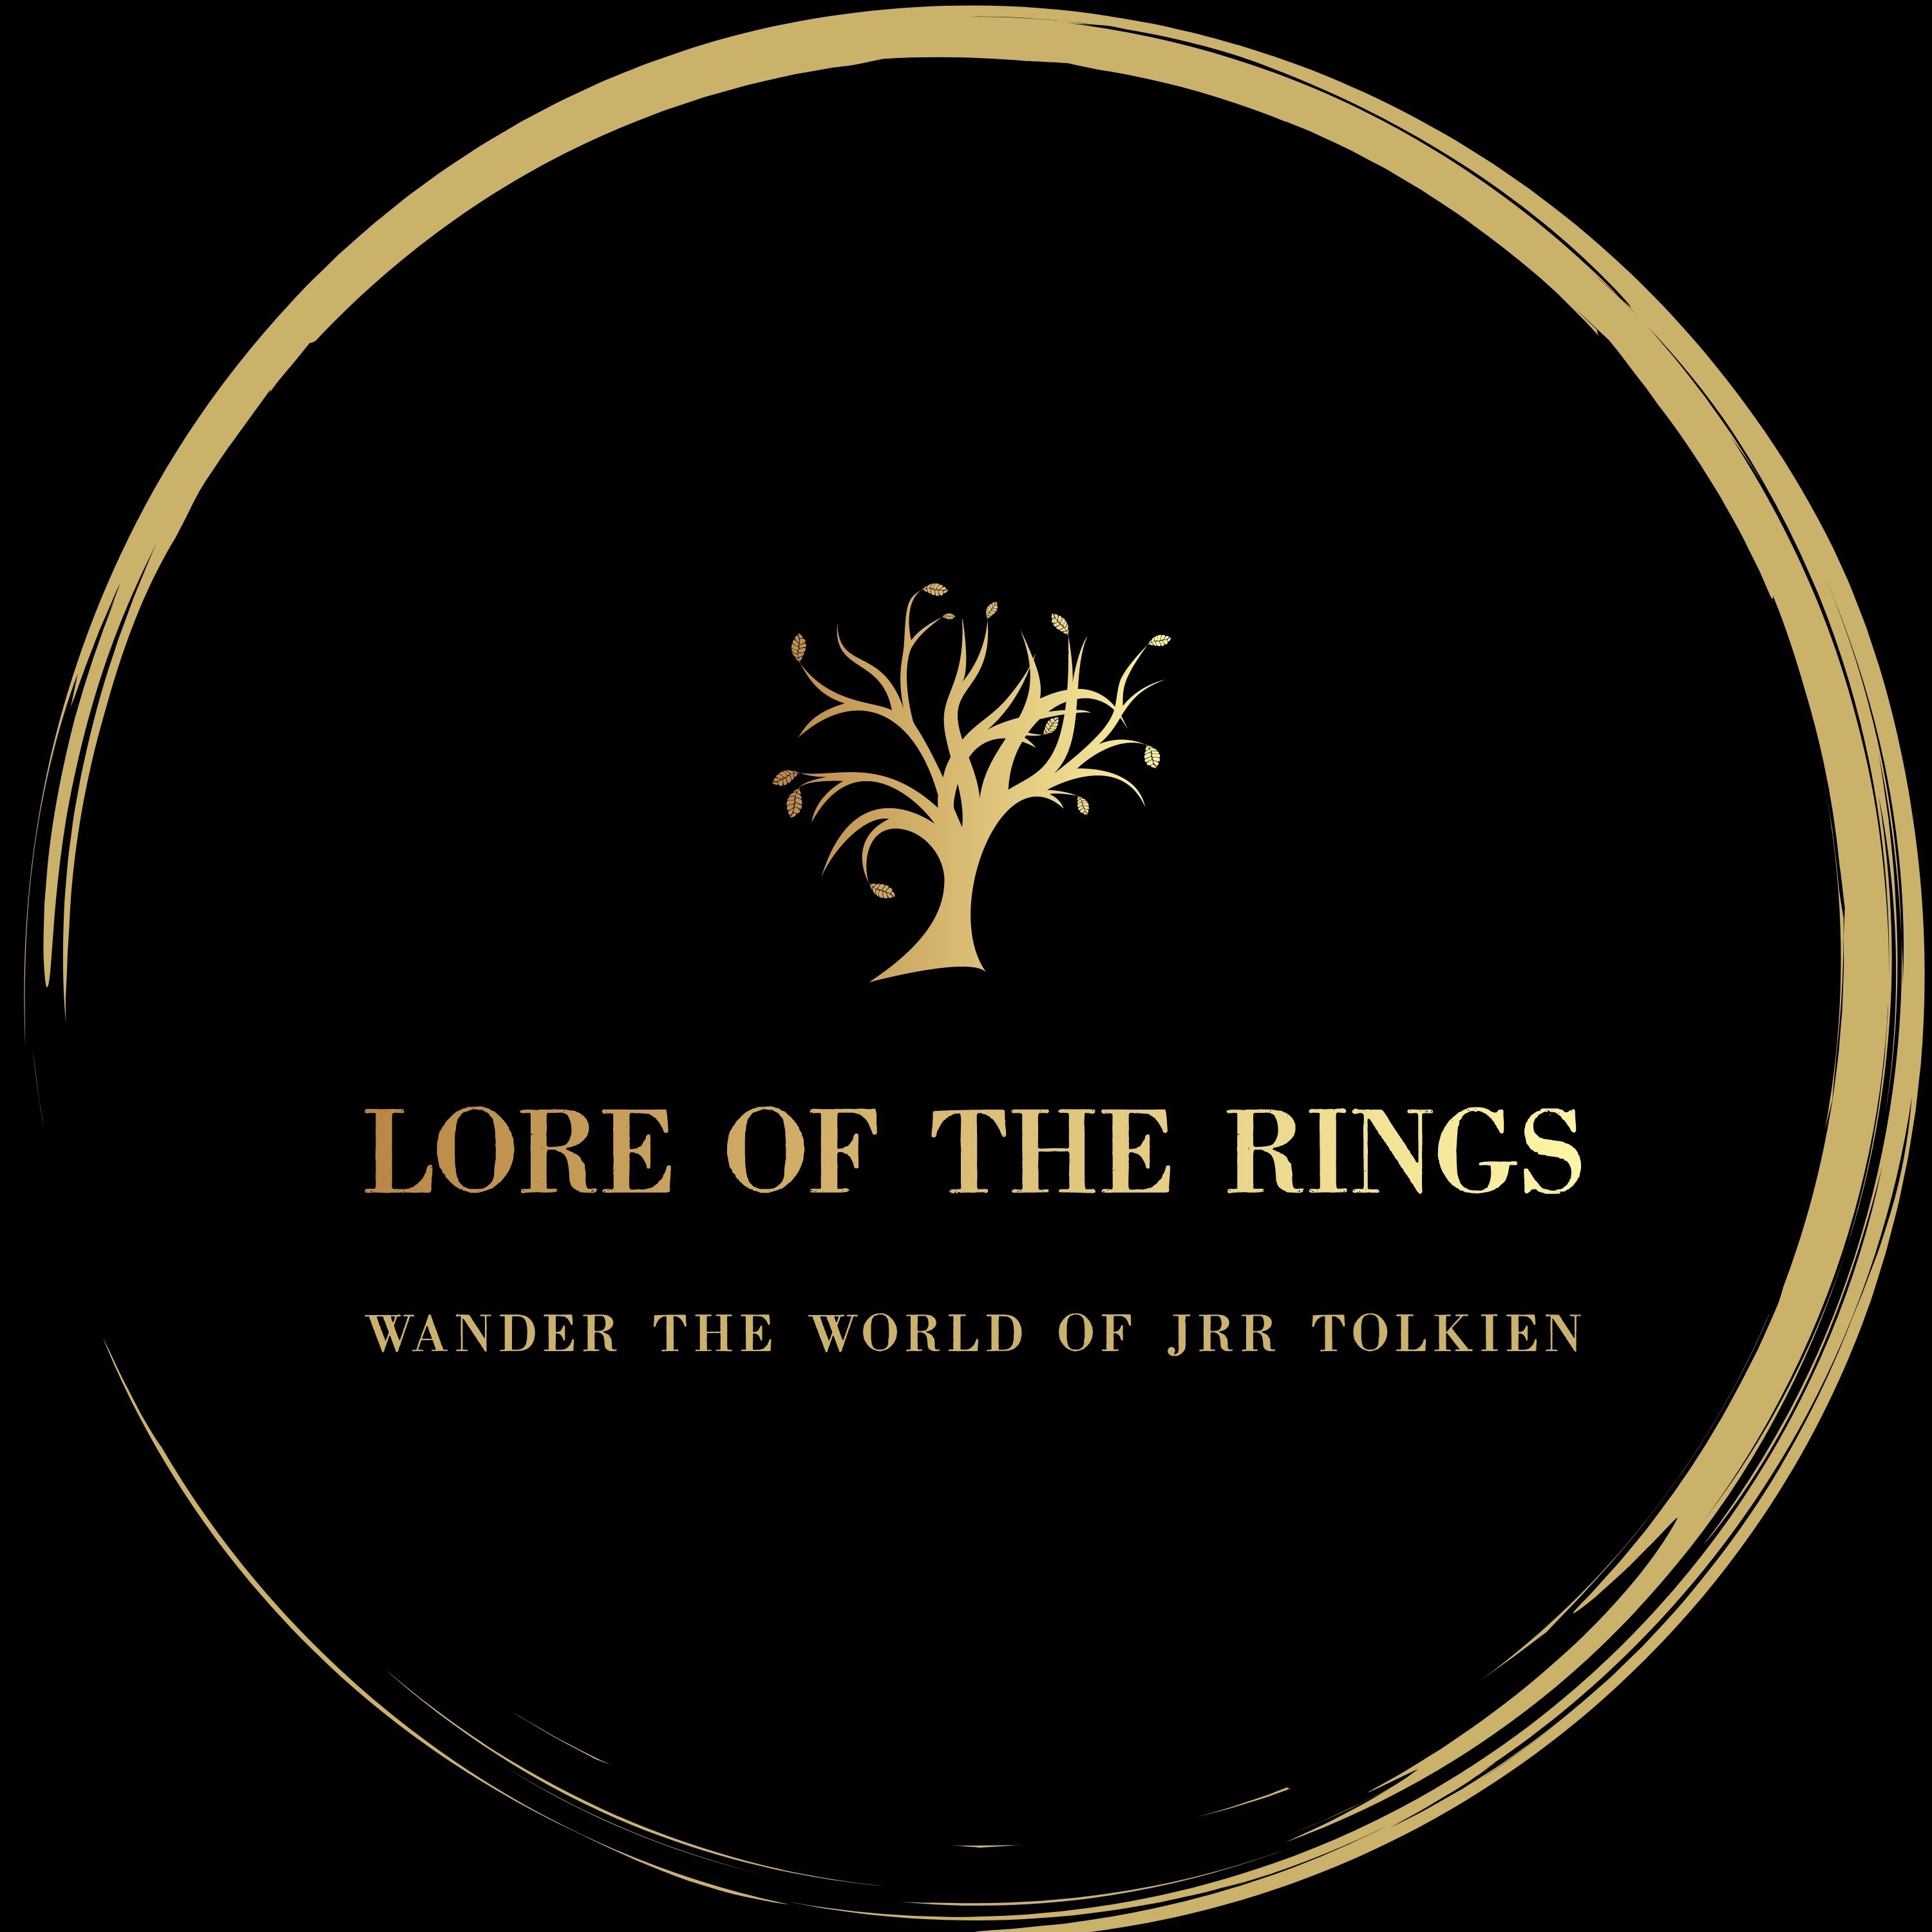 Khazad-dûm  Peter Jackson's The Lord of the Rings Trilogy Wiki